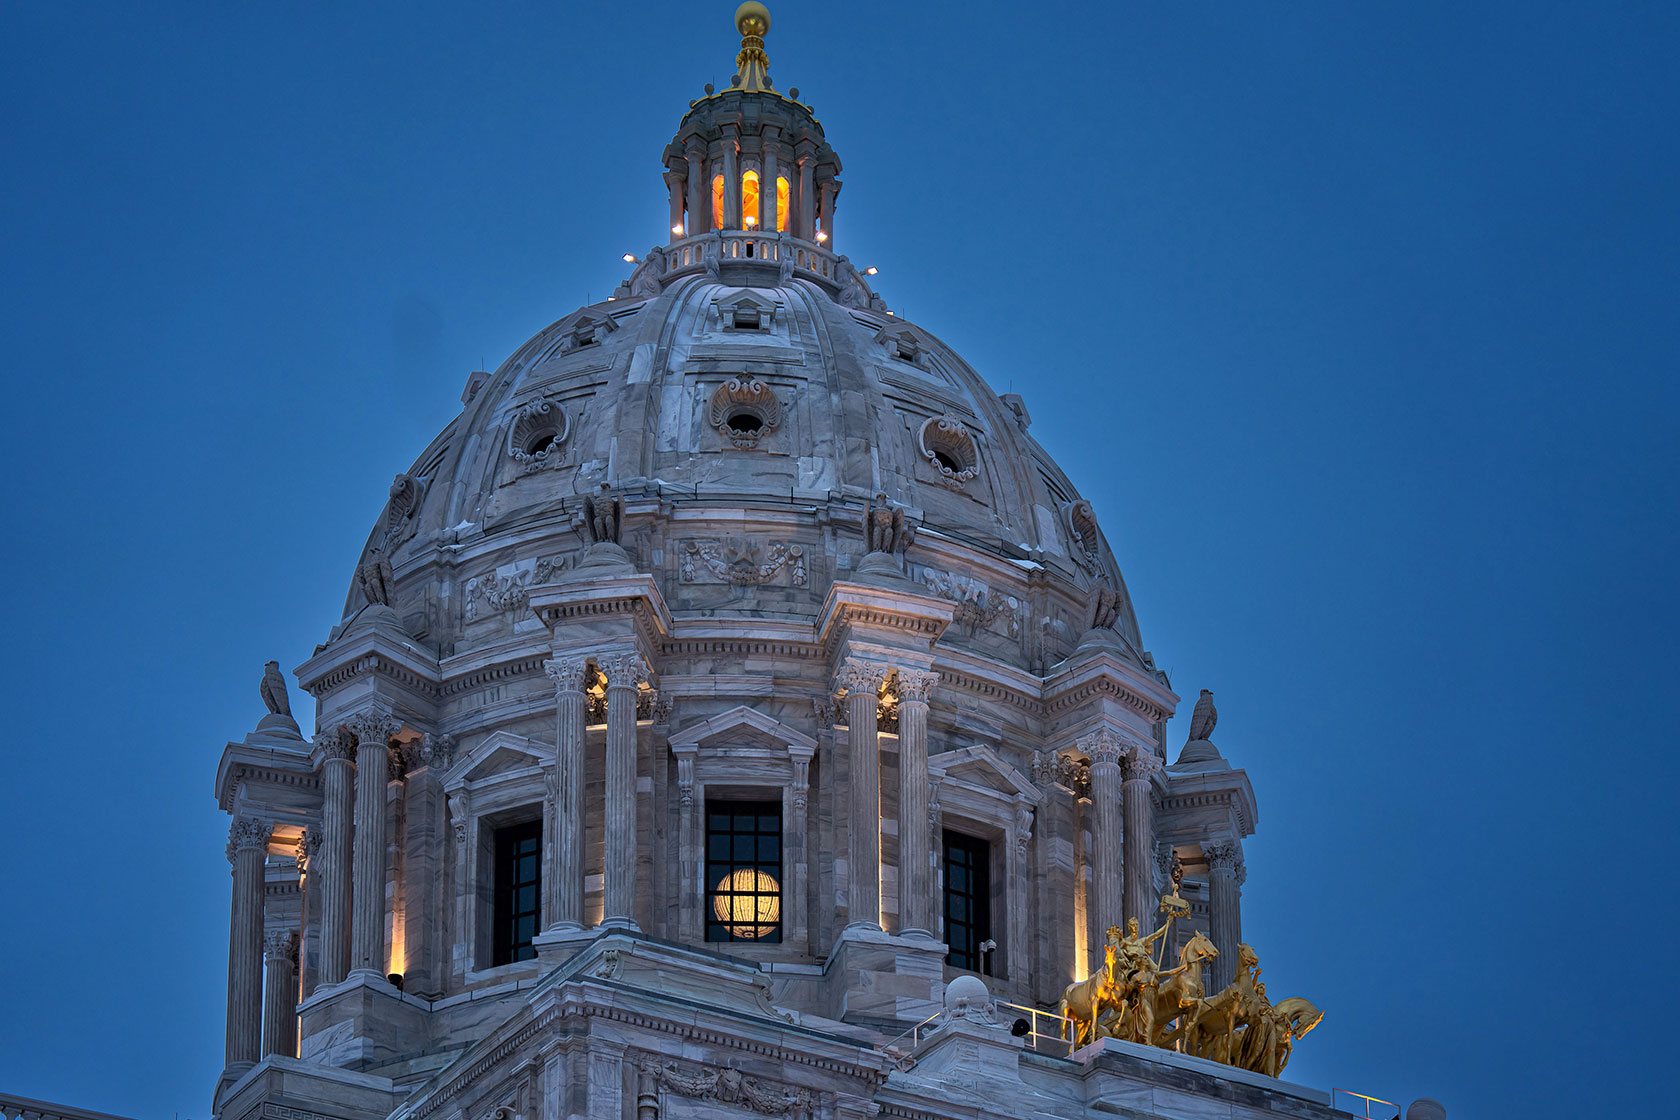 Photo shows the Minnesota state capitol dome against a dark blue sky